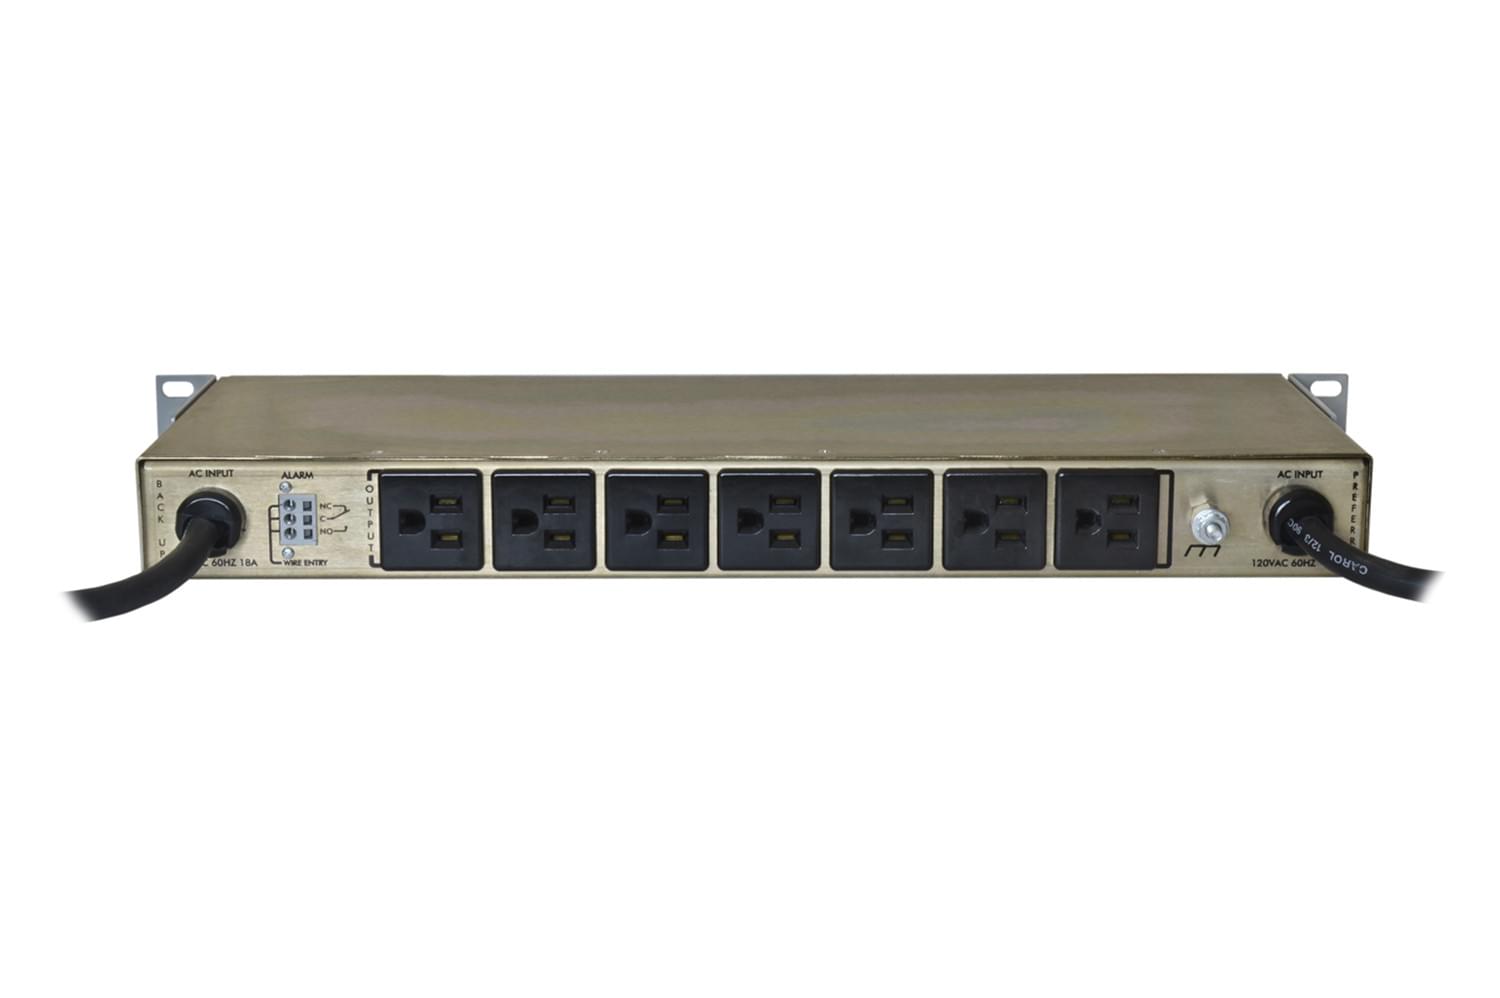 Wilmore Series 1704 Automatic AC-power Transfer Switch